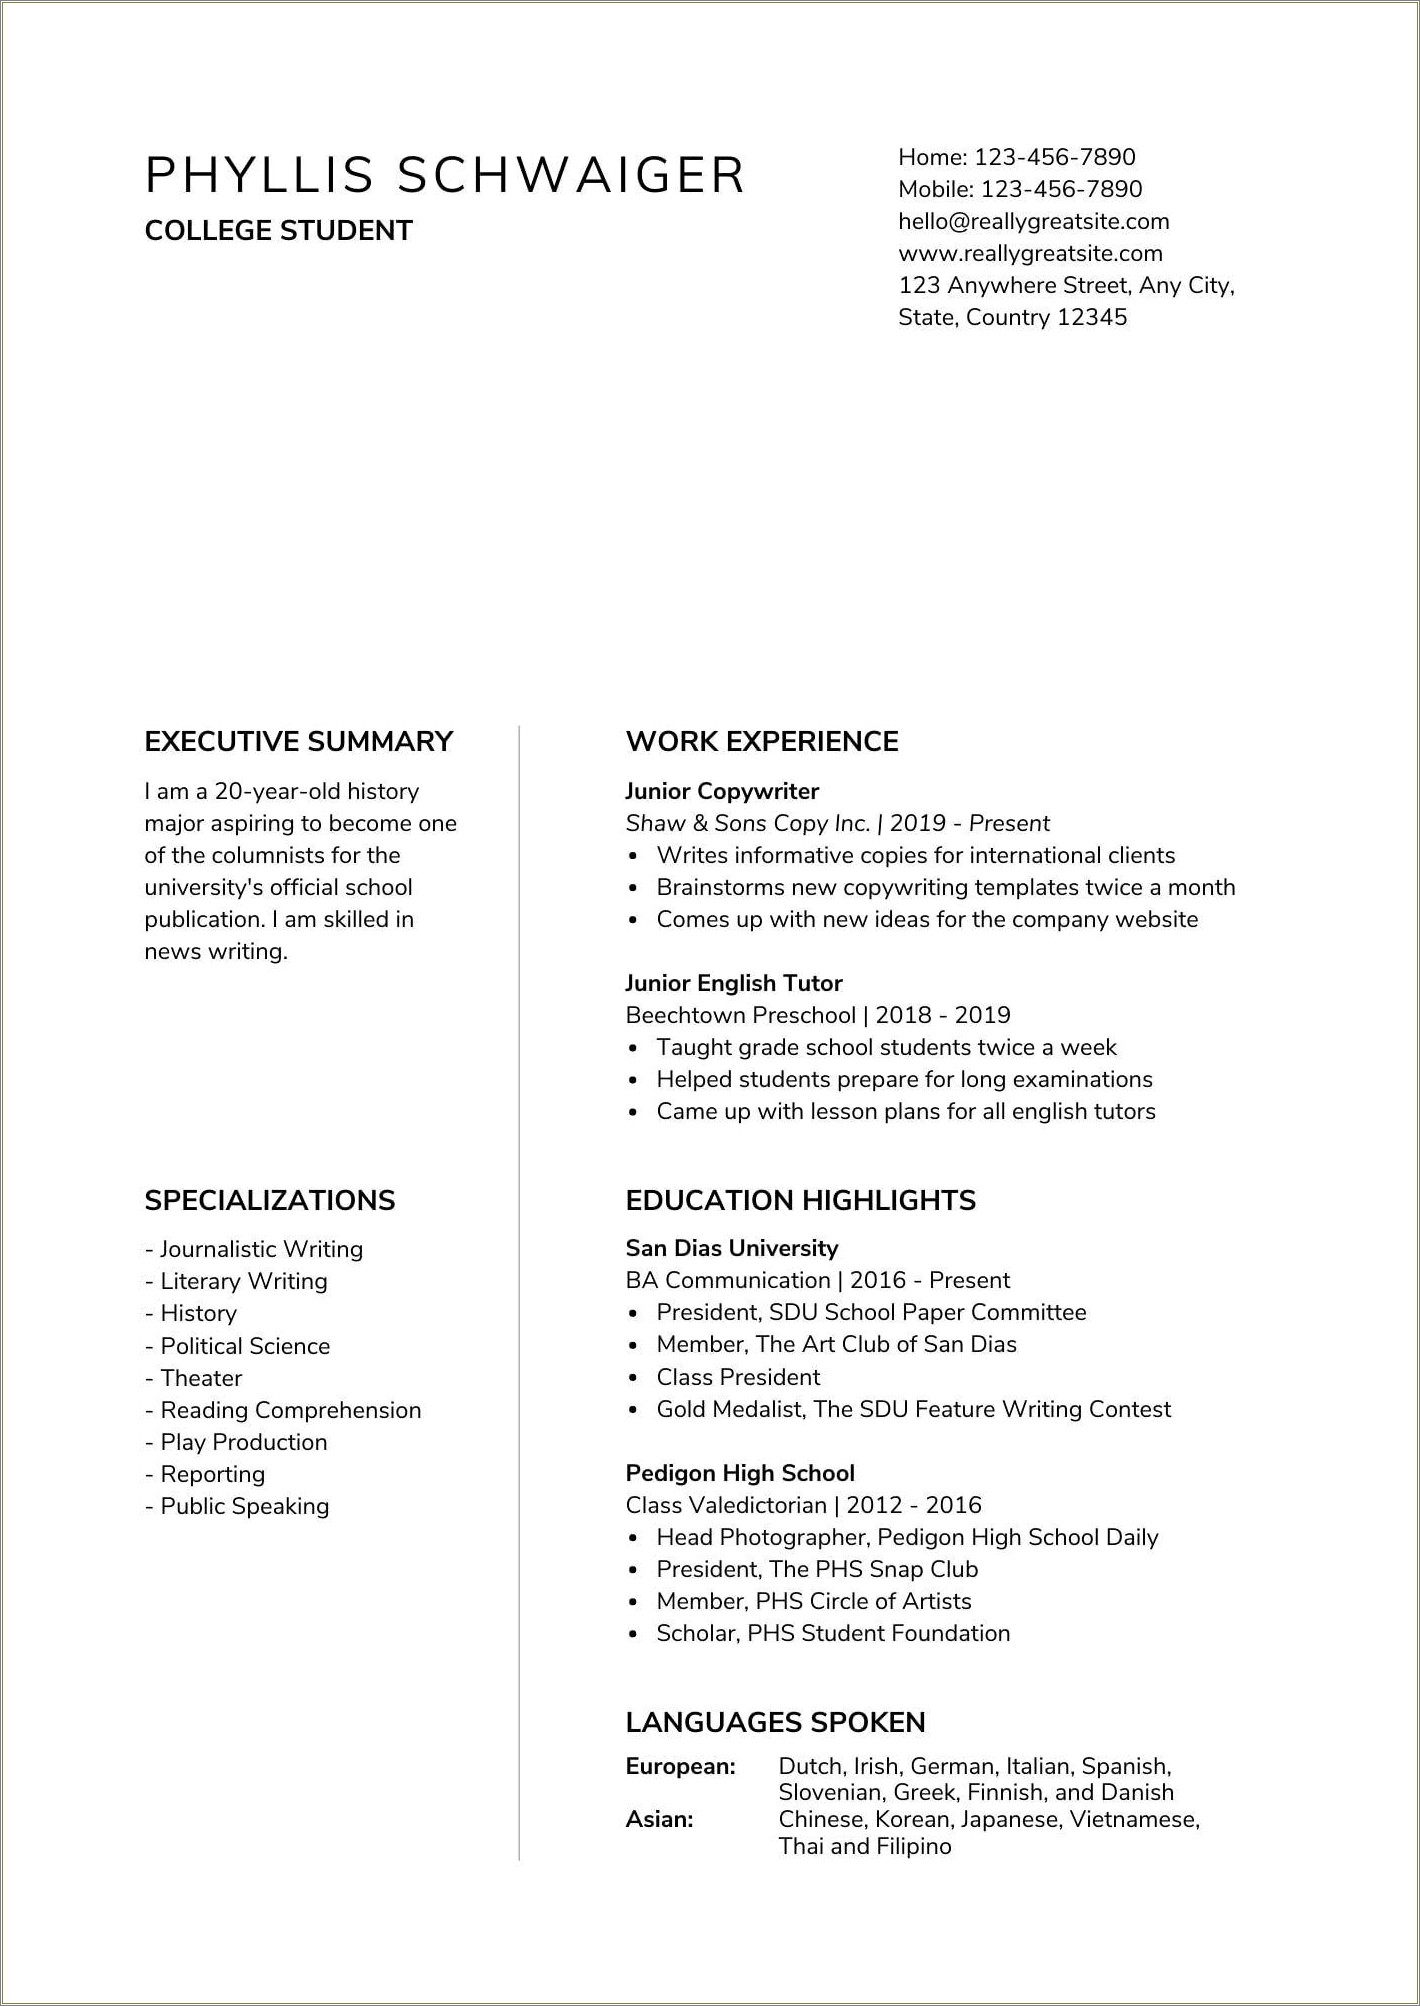 Resume No Work Experience Or Clubs